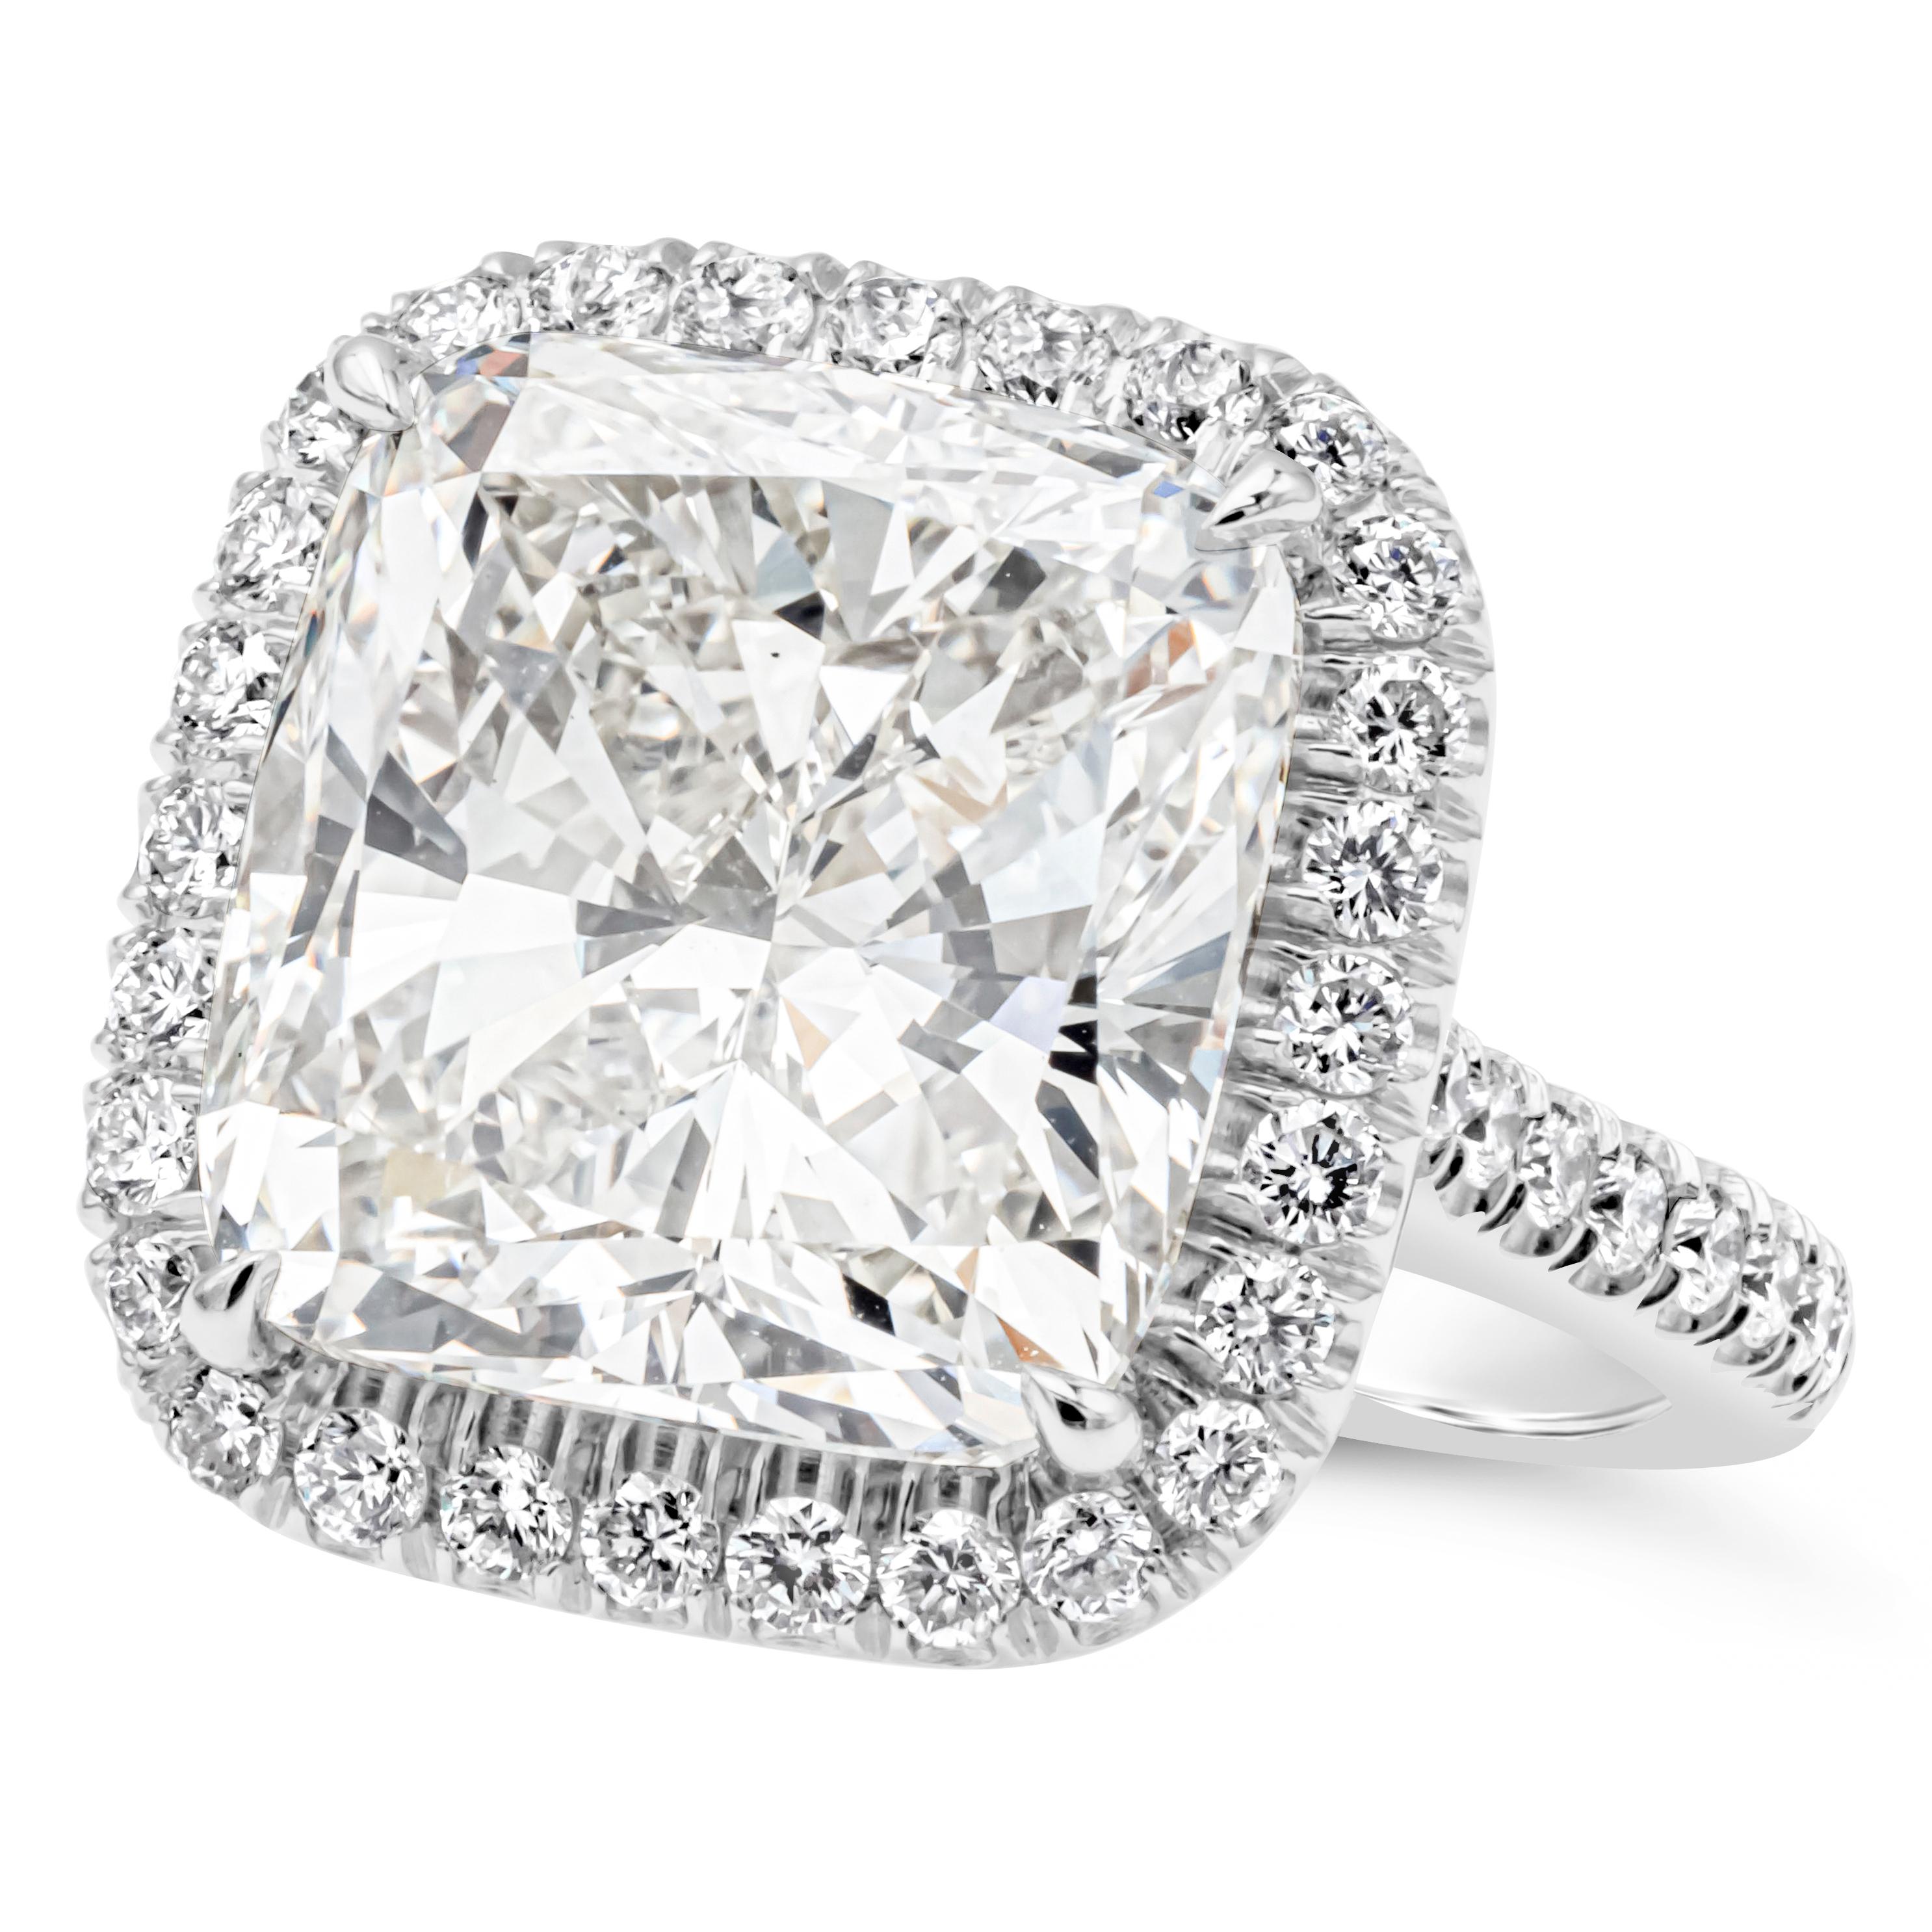 Brilliant and elegantly made halo engagement ring showcasing a GIA certified 11.46 carats cushion cut diamond, J Color and VS2 in Clarity. Set in a platinum four prong setting and surrounded by a row of brilliant round diamonds. Platinum shank is